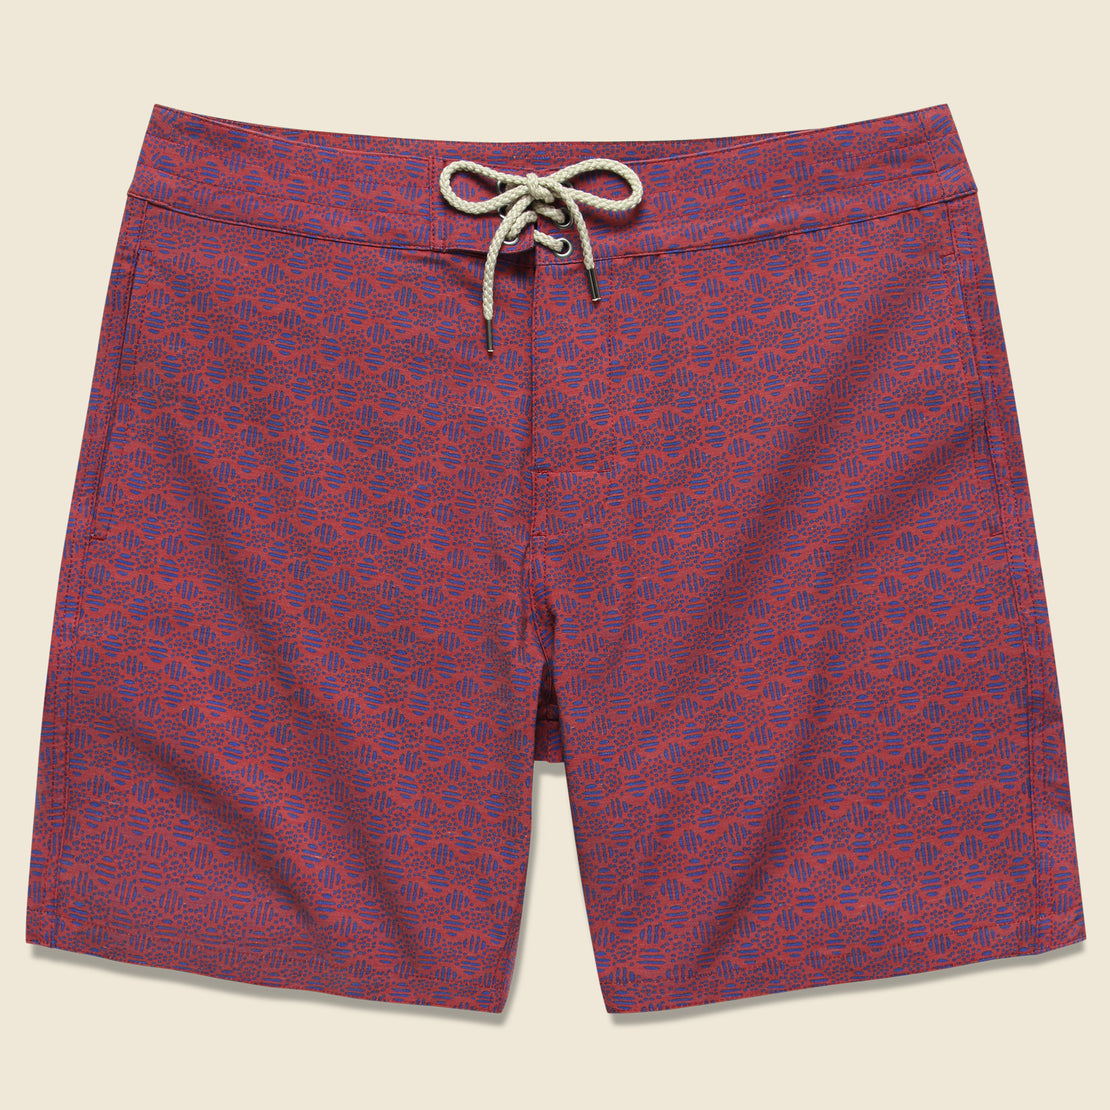 Faherty Classic 7" Boardshort - Etched Circle Red